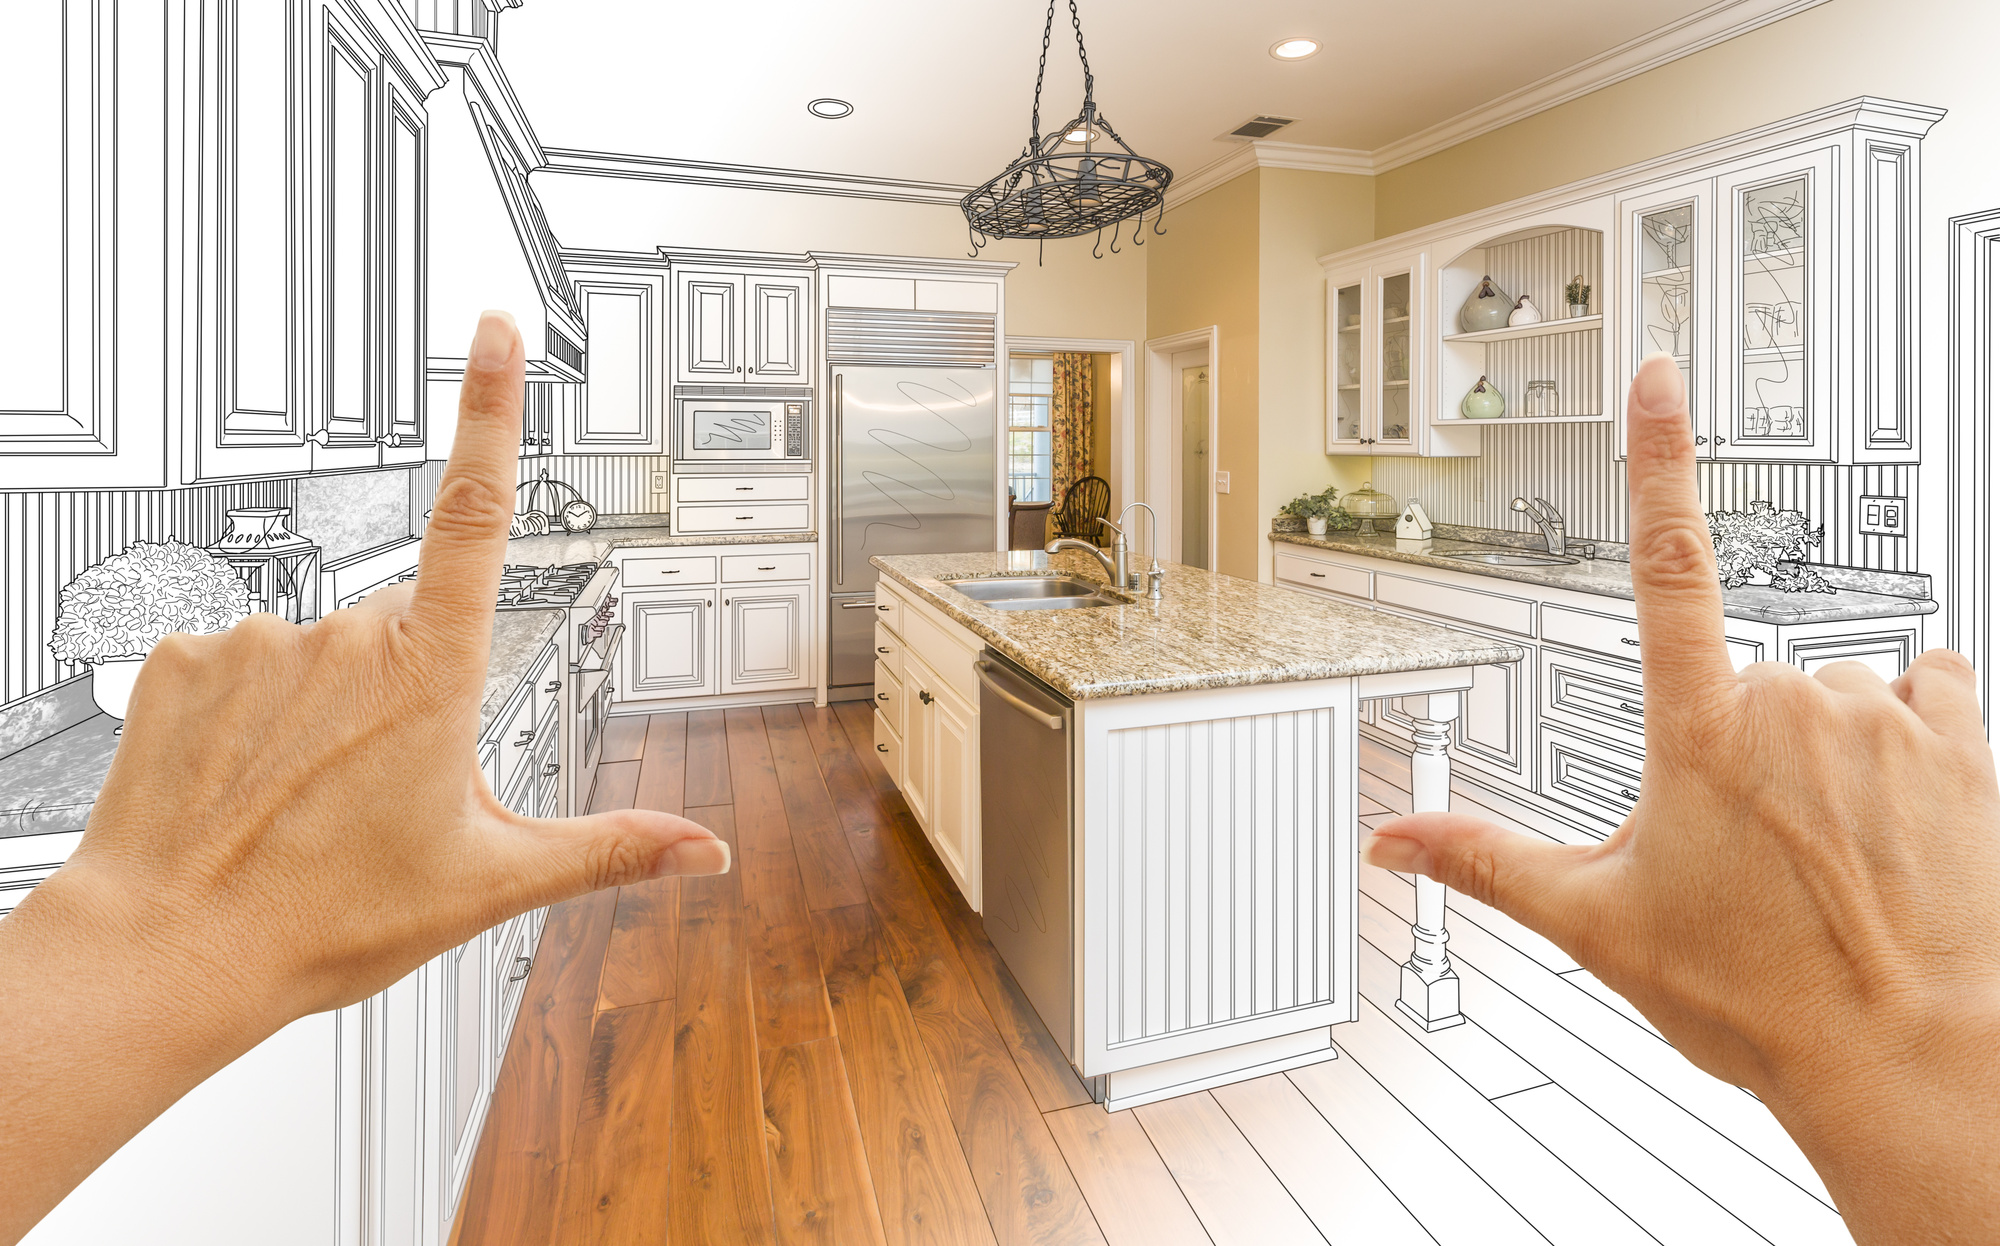 Keep It Lean: How to Plan a Kitchen Remodel That Doesn't Break the Bank